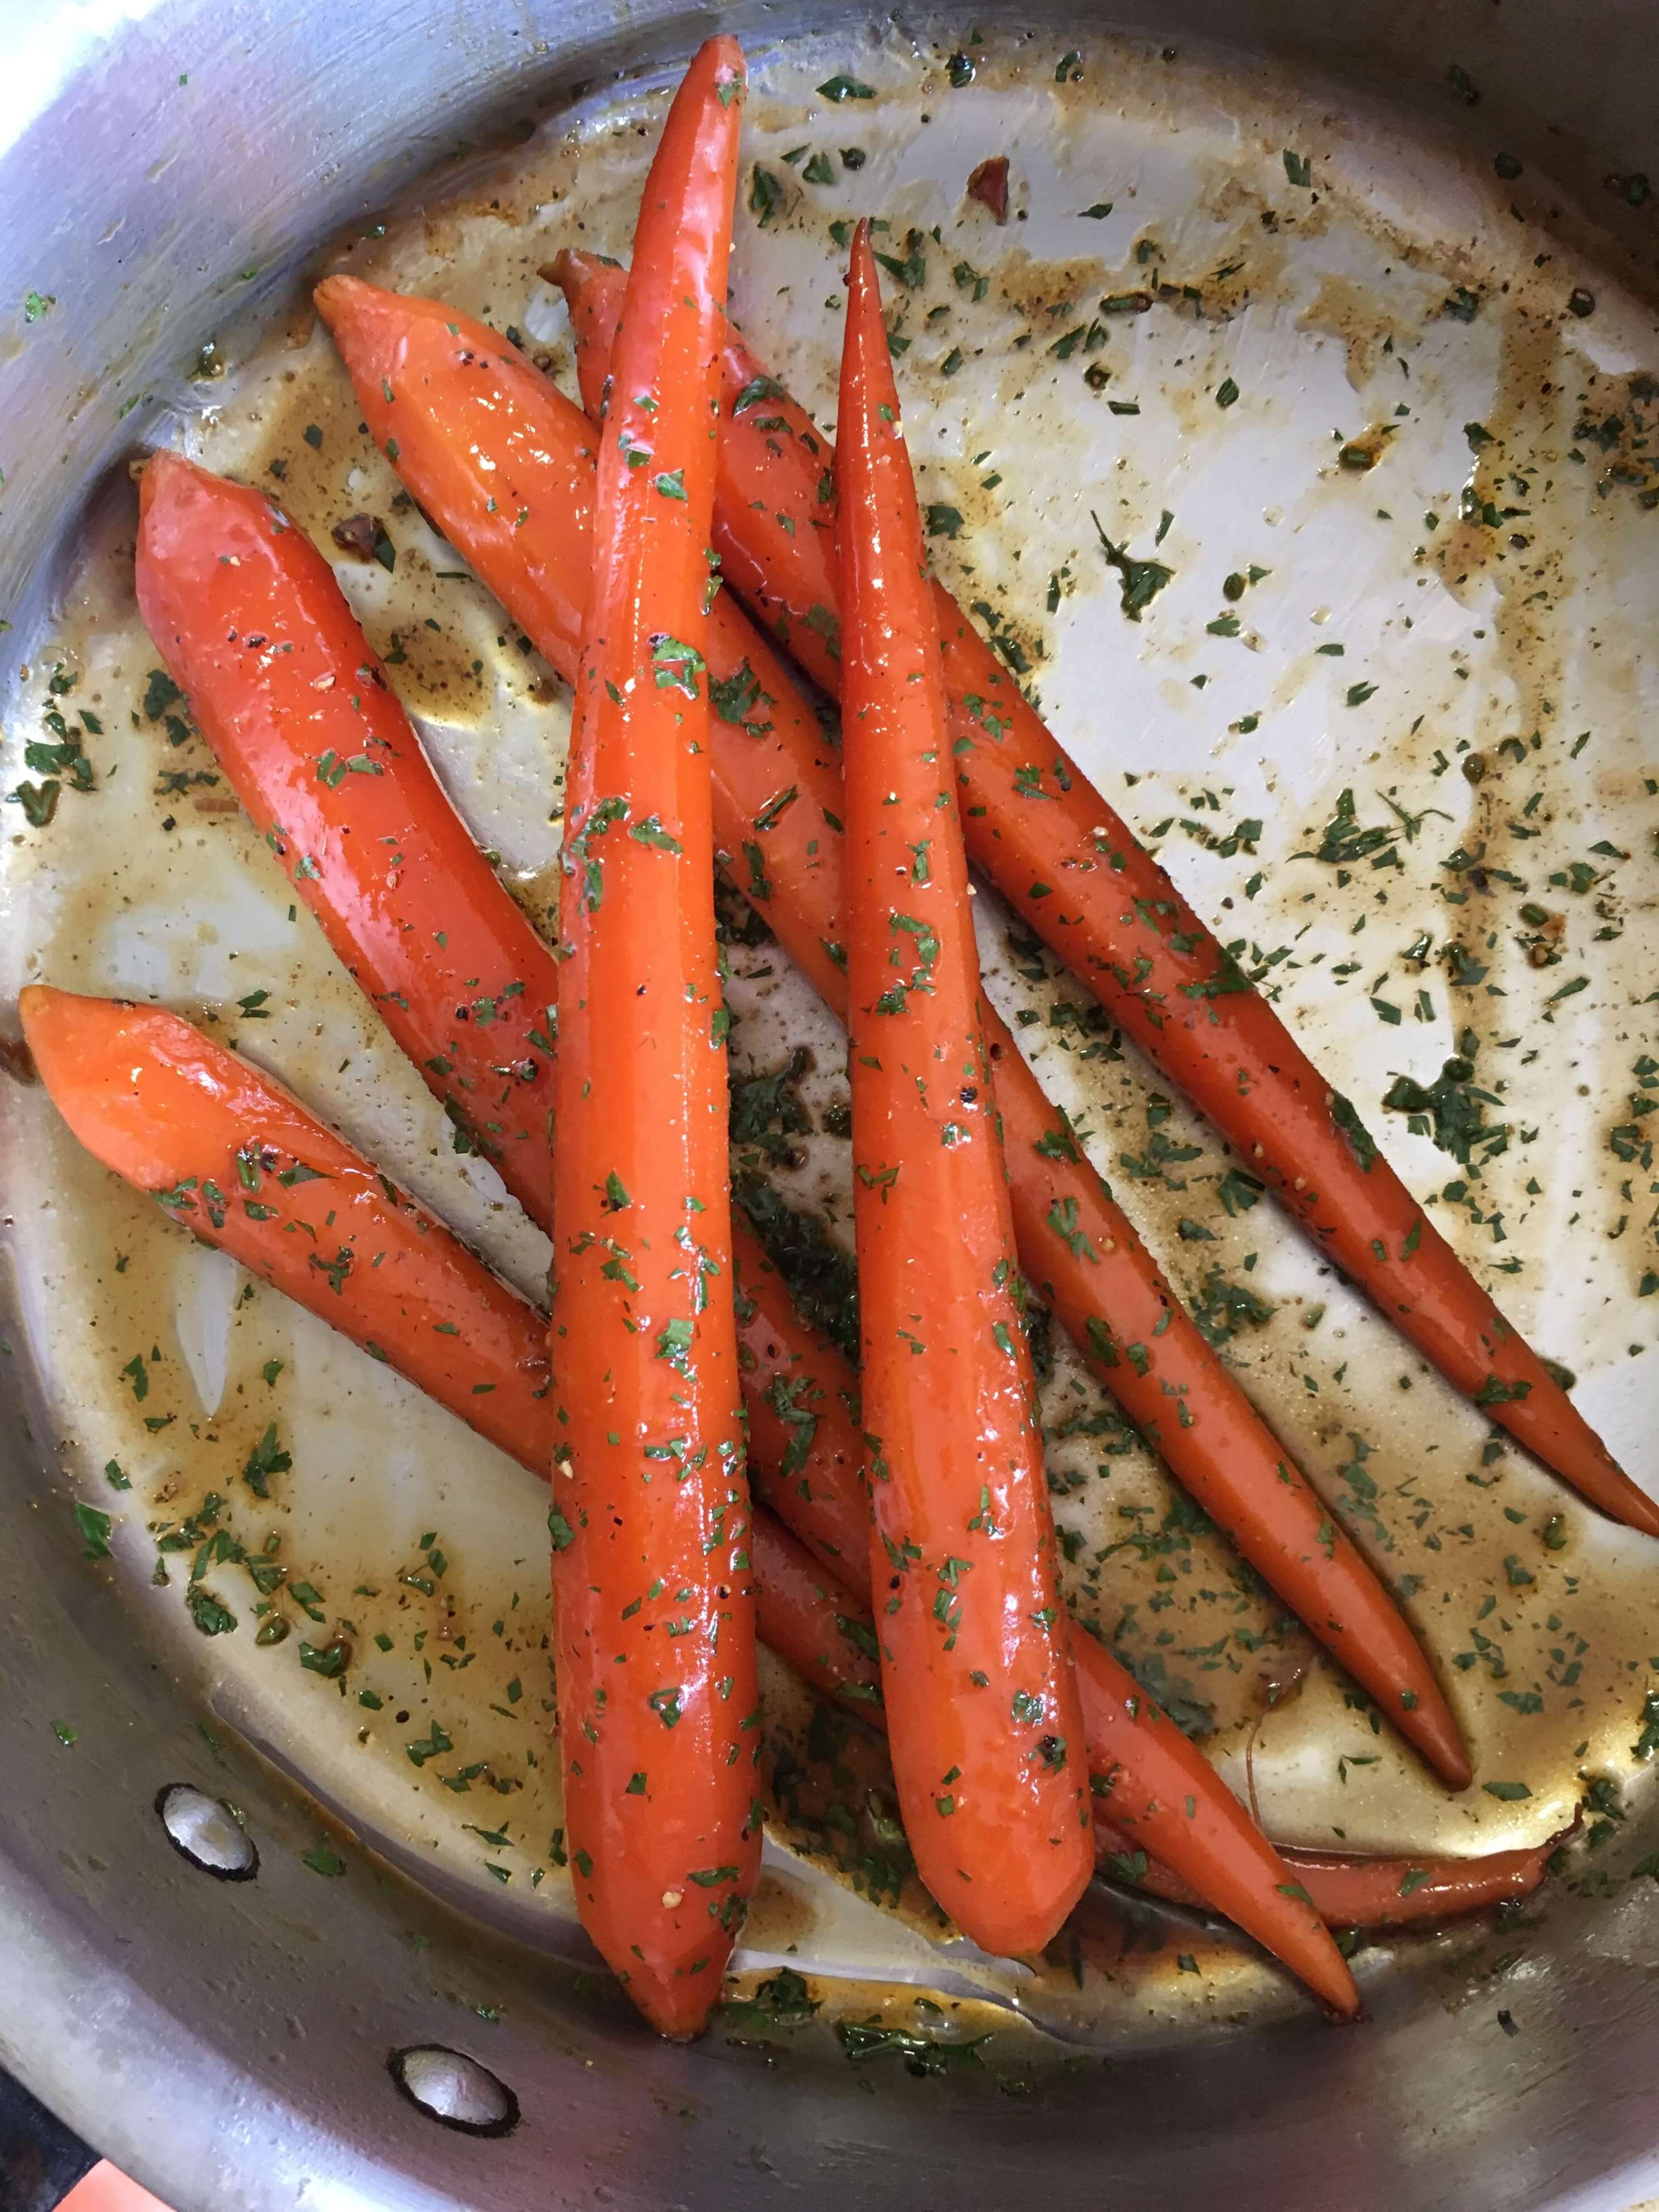 Honey-Glazed Carrots with Coriander and Black Pepper